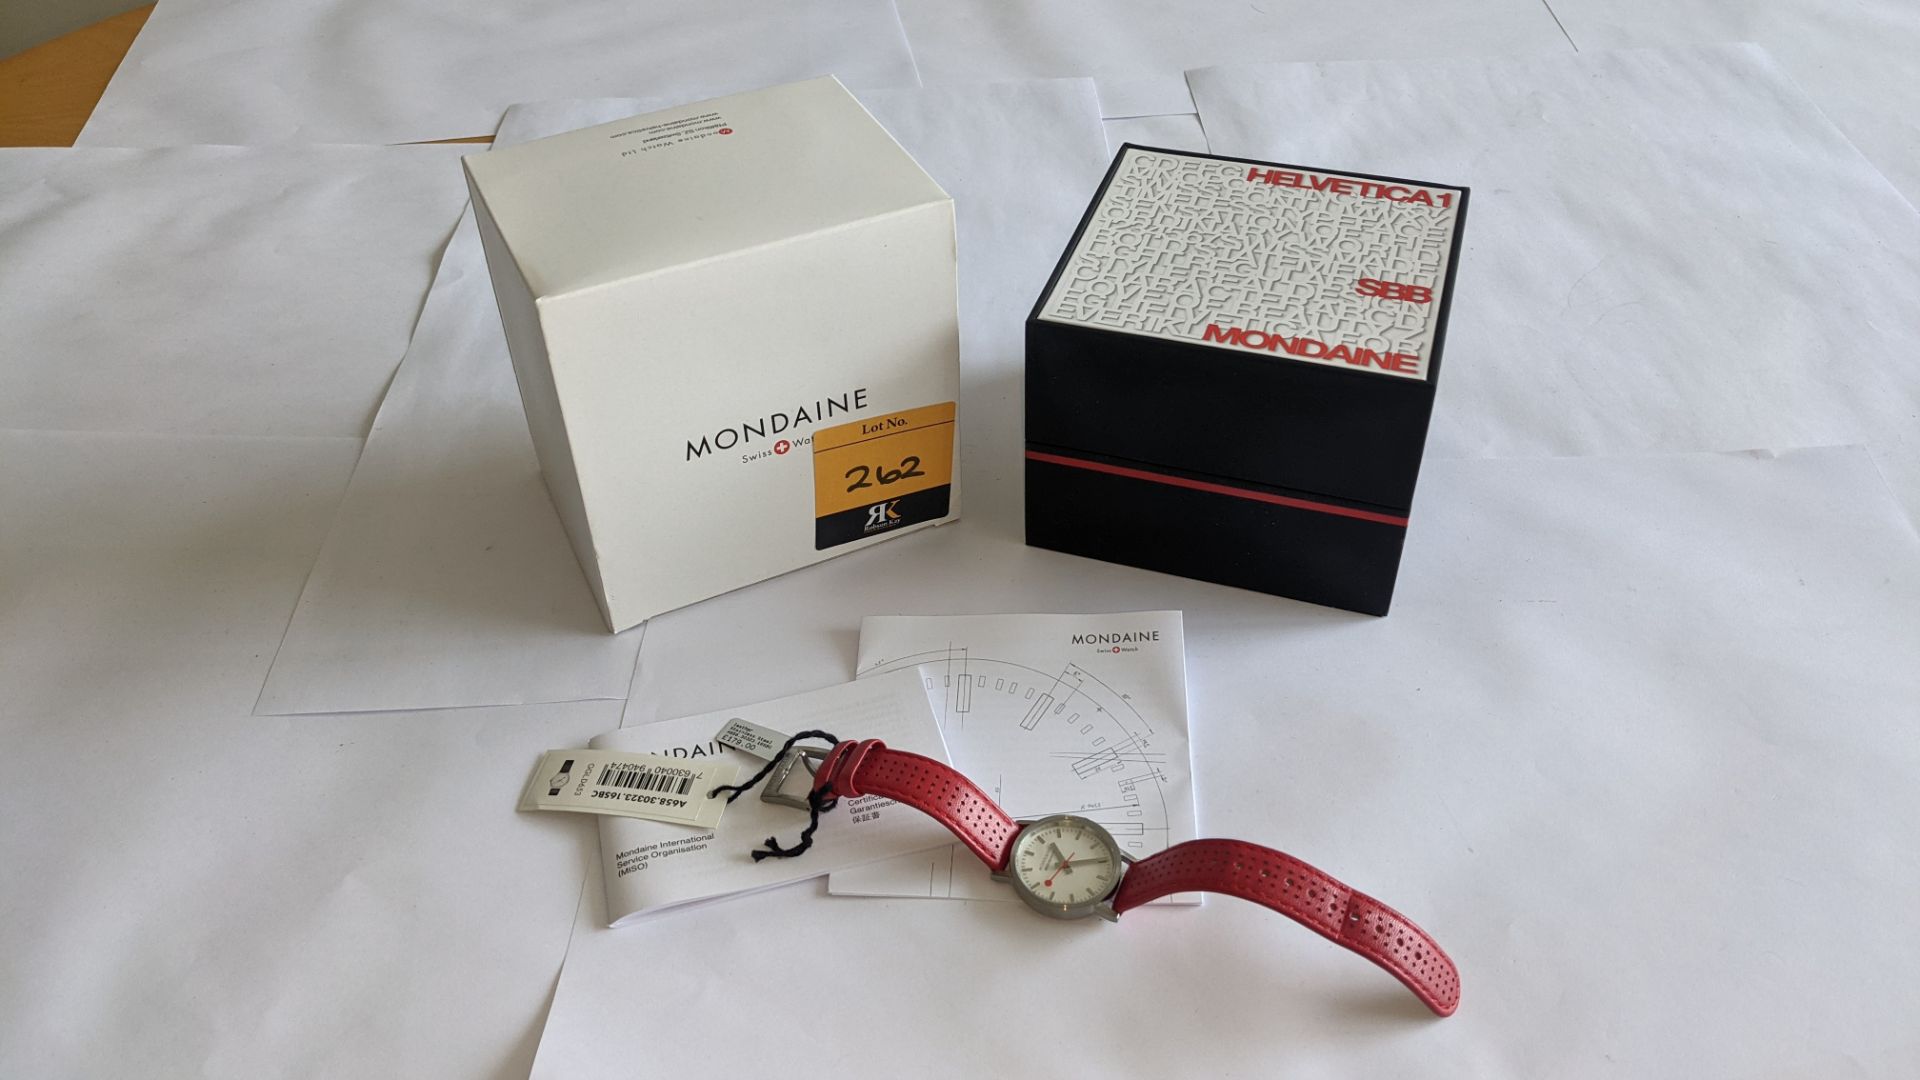 Mondaine watch on red leather strap. Product code A658.30323.16SBC. Water resistant, stainless steel - Image 14 of 15